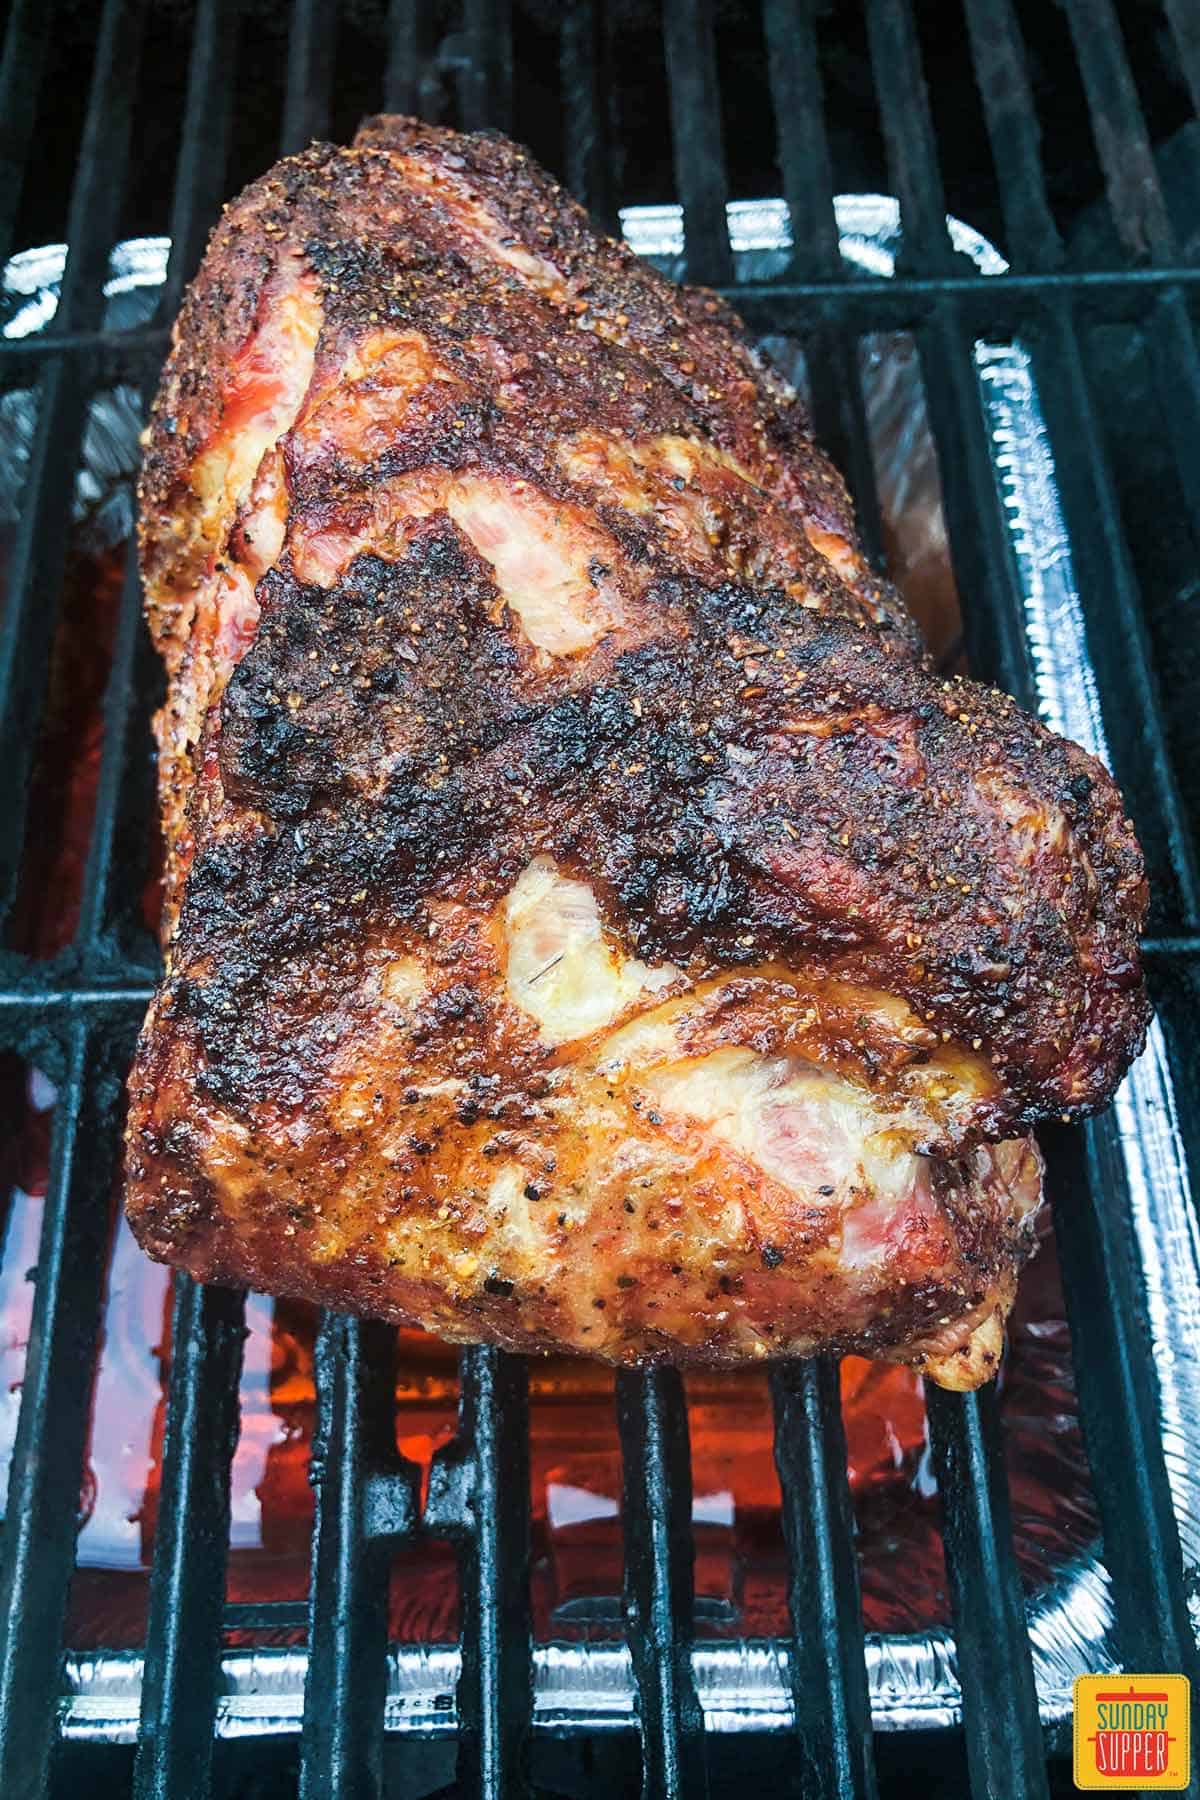 How to Smoke a Whole chicken on a Charcoal Grill
